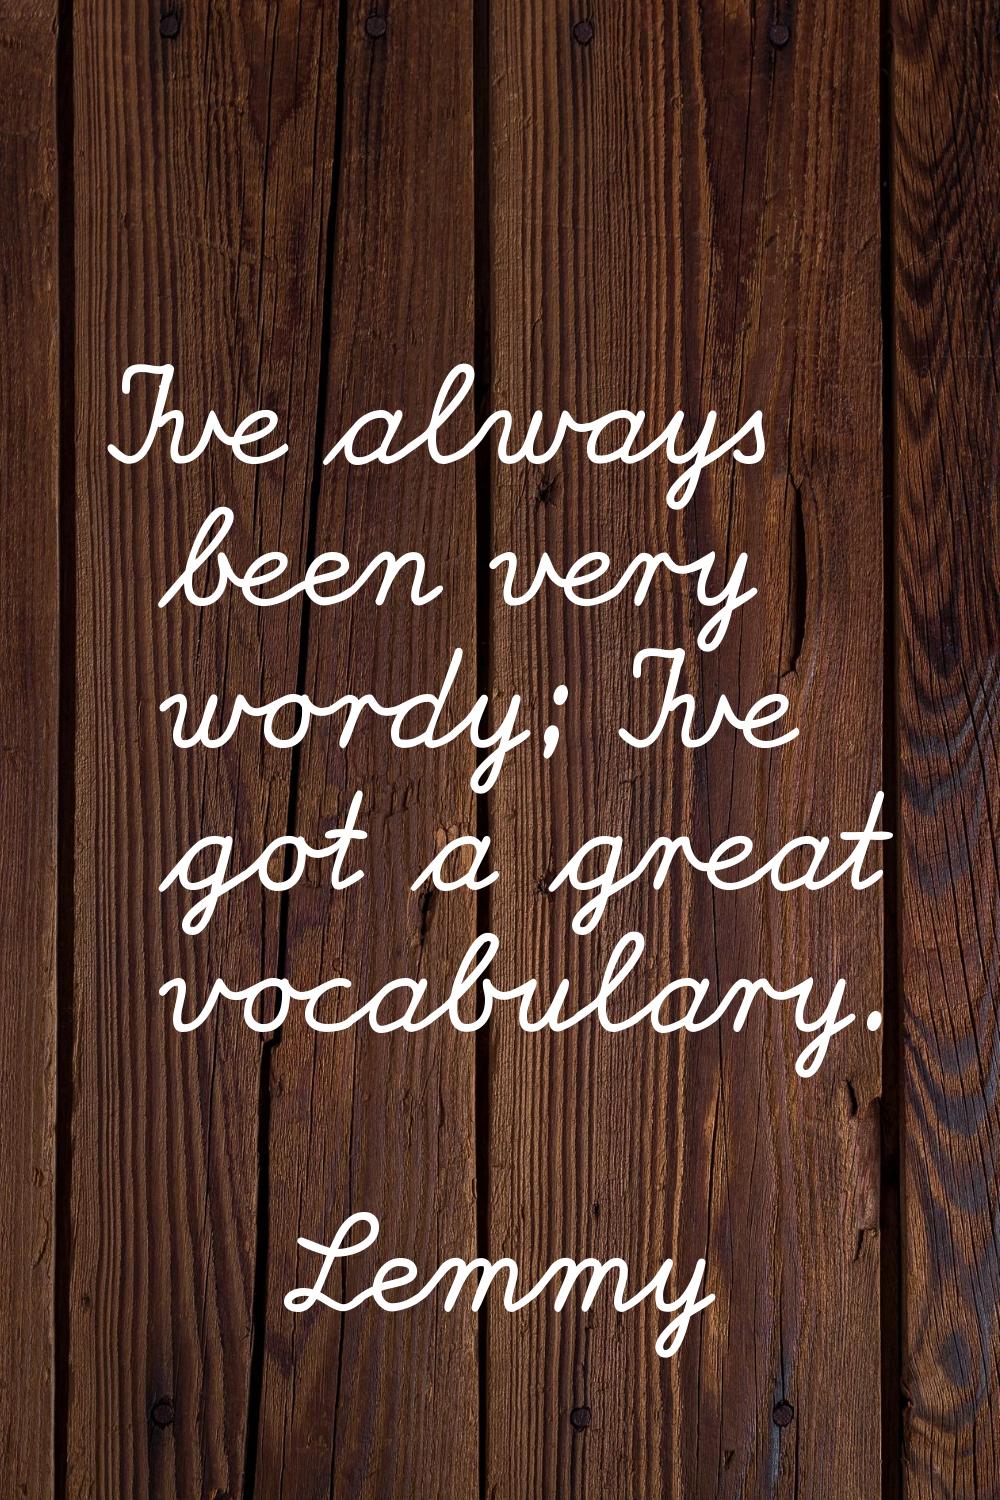 I've always been very wordy; I've got a great vocabulary.